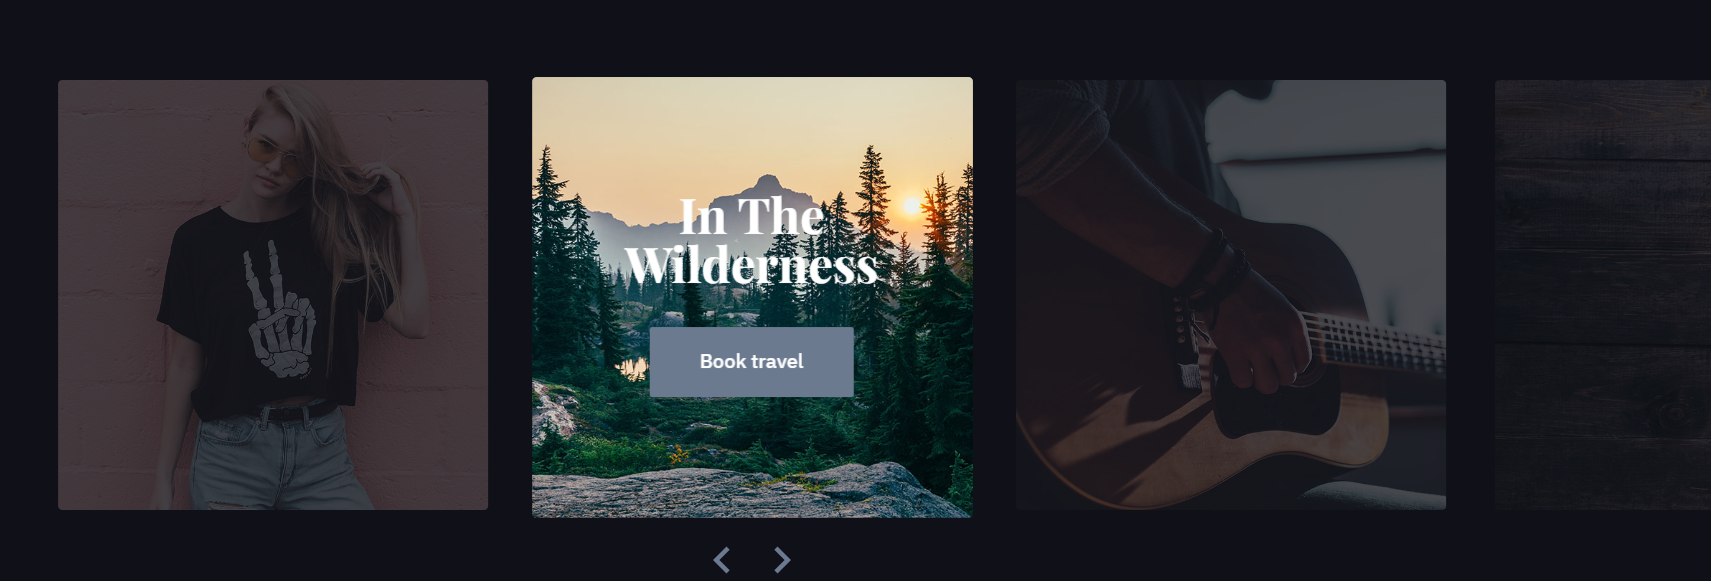 Slider / Hover Effect Using CSS